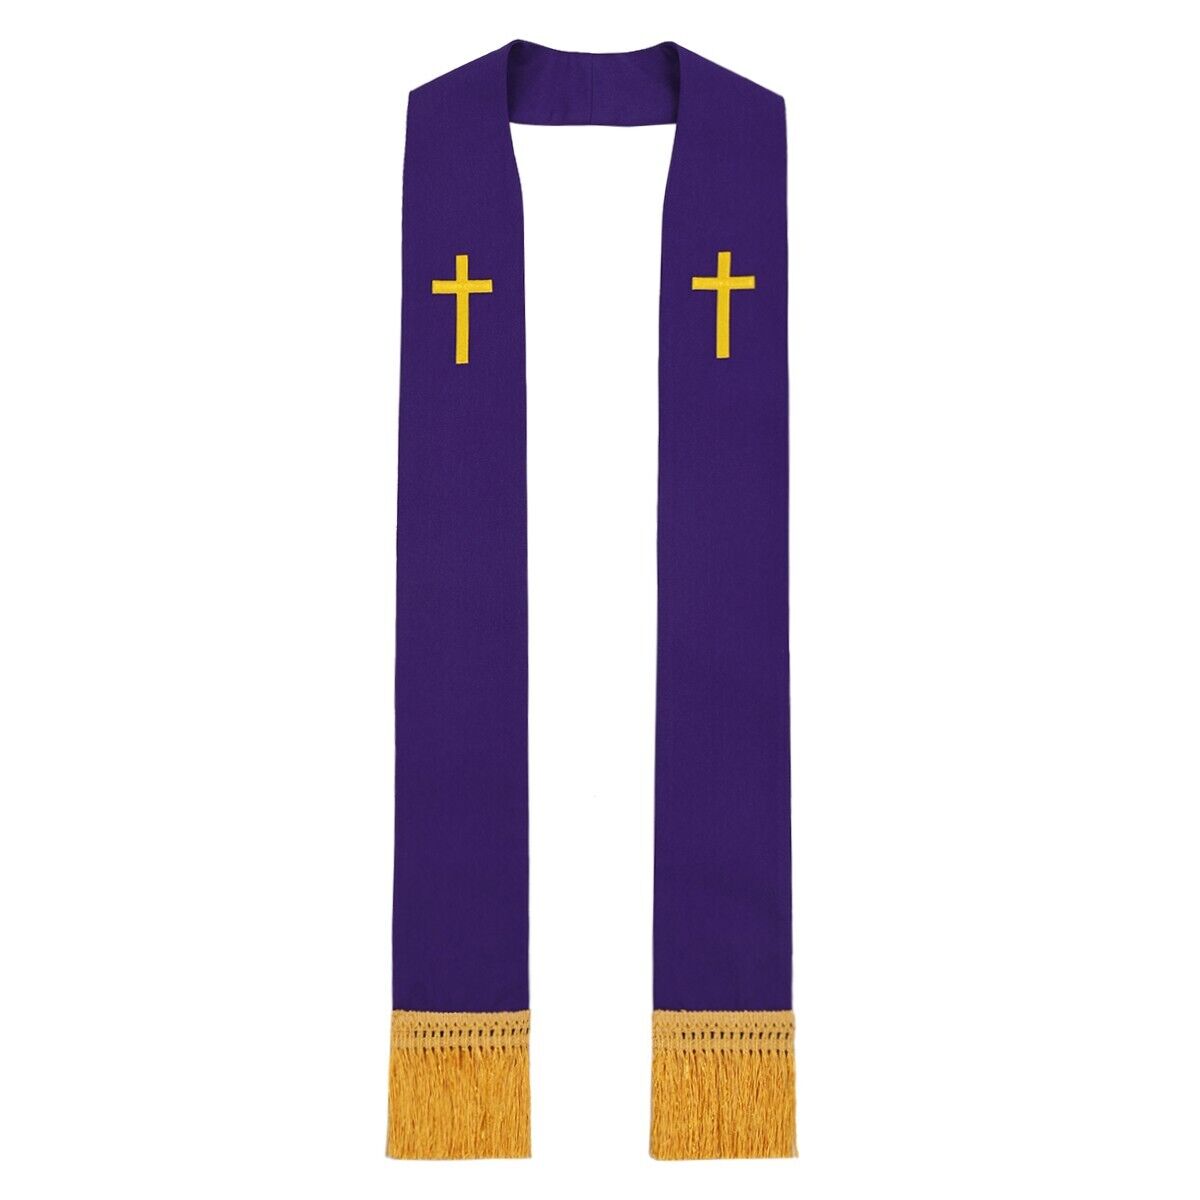 Priest Purple Stole Pastor Clergy Stole with Golden Cross Embroidery Fringe